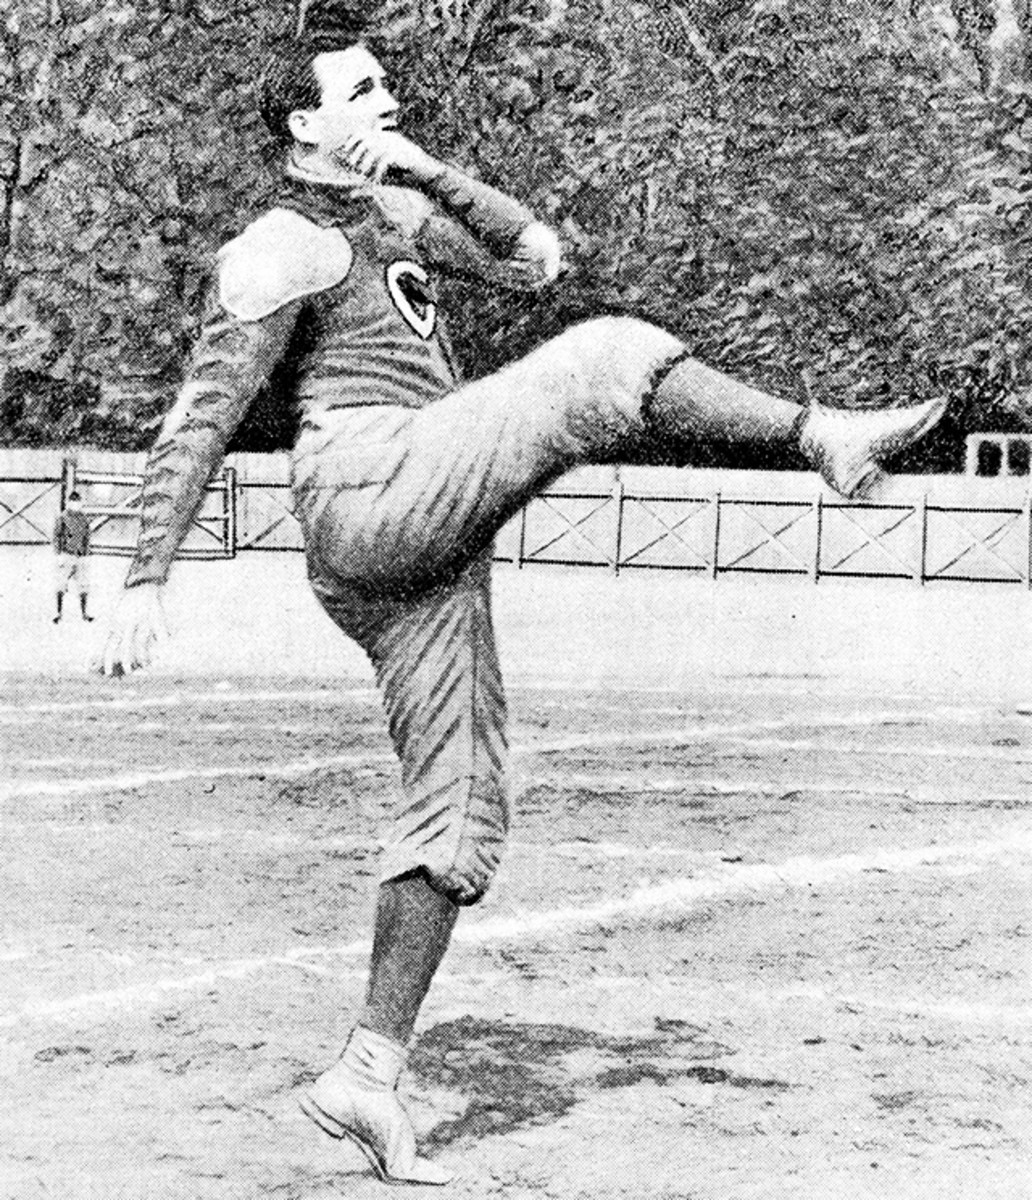 Orval Overall was a two-sport star at Cal and later a major league pitching ace.